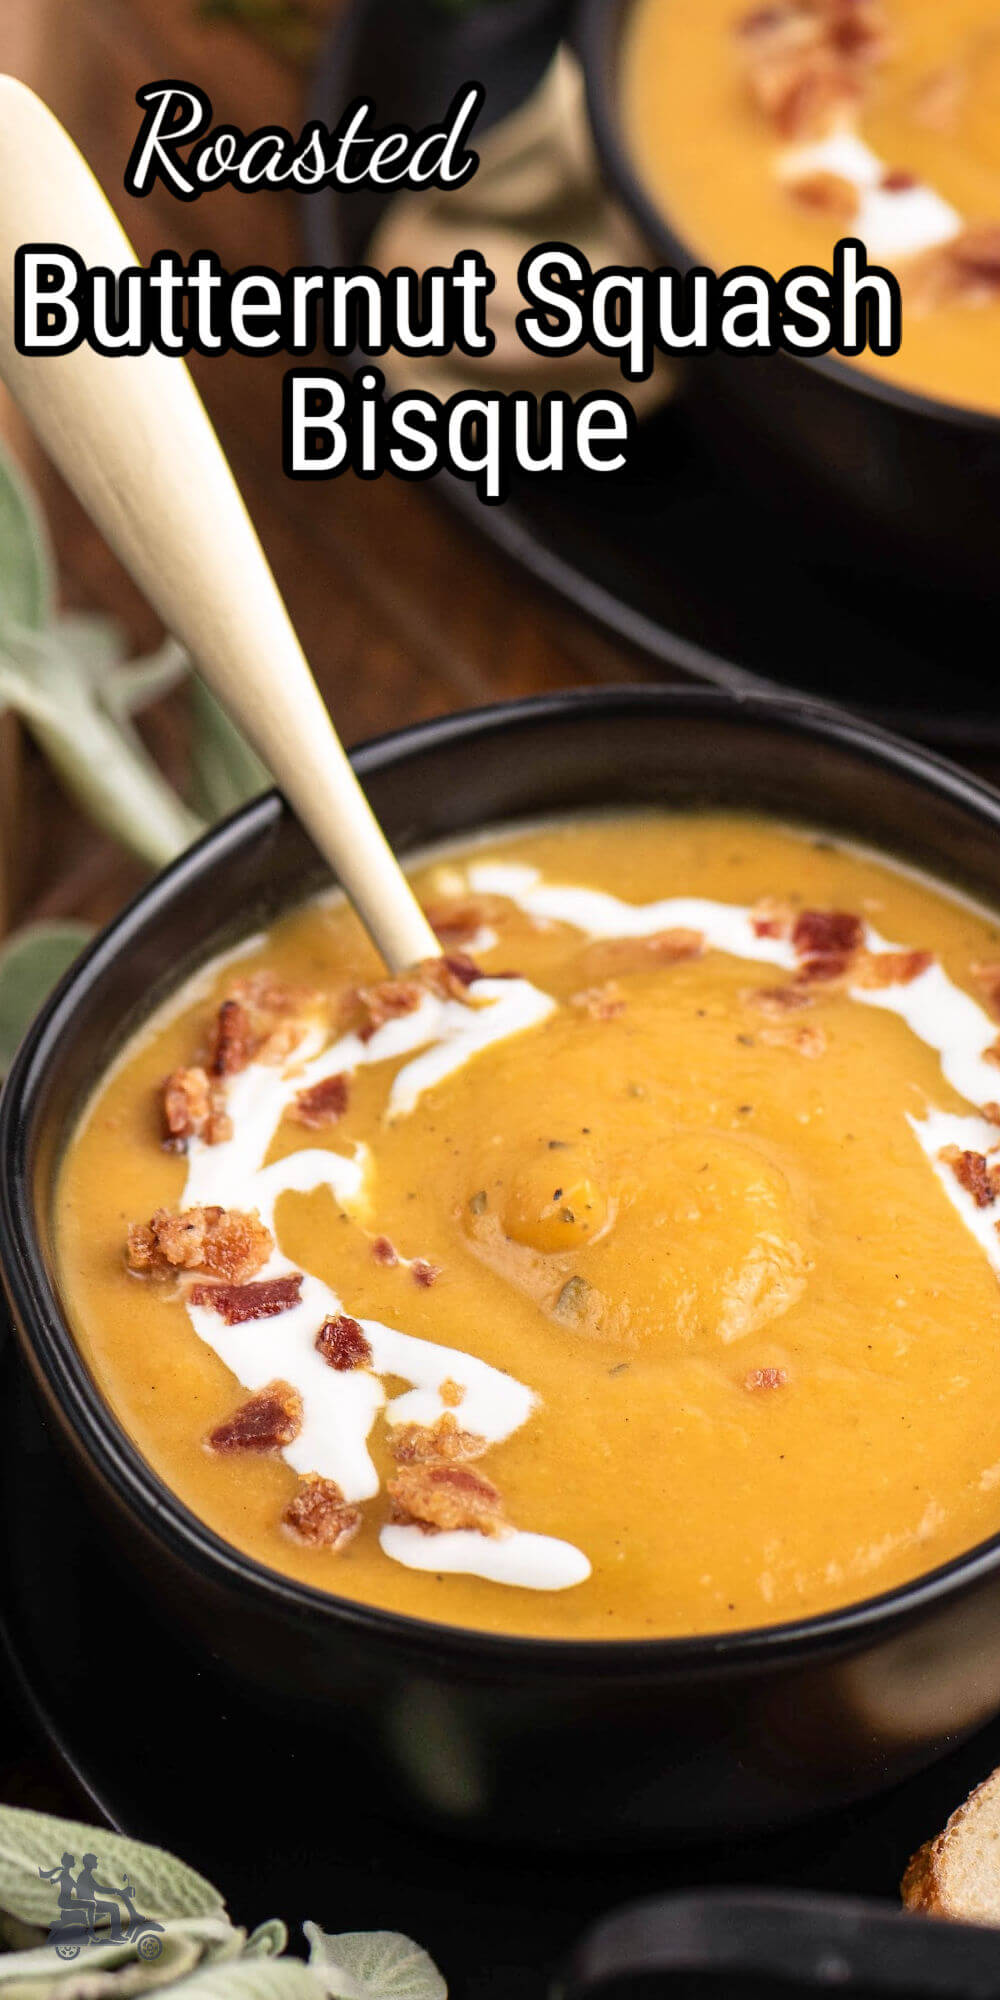 This roasted butternut squash soup is an absolute must-make during the Fall and winter season; slow roasted winter squash gets caramelized in the oven and then blends with spices like flavorful allspice. Topped with a drizzle of sour cream and salty bacon bits. It's intense in flavor and super creamy! Make it your holiday soup.